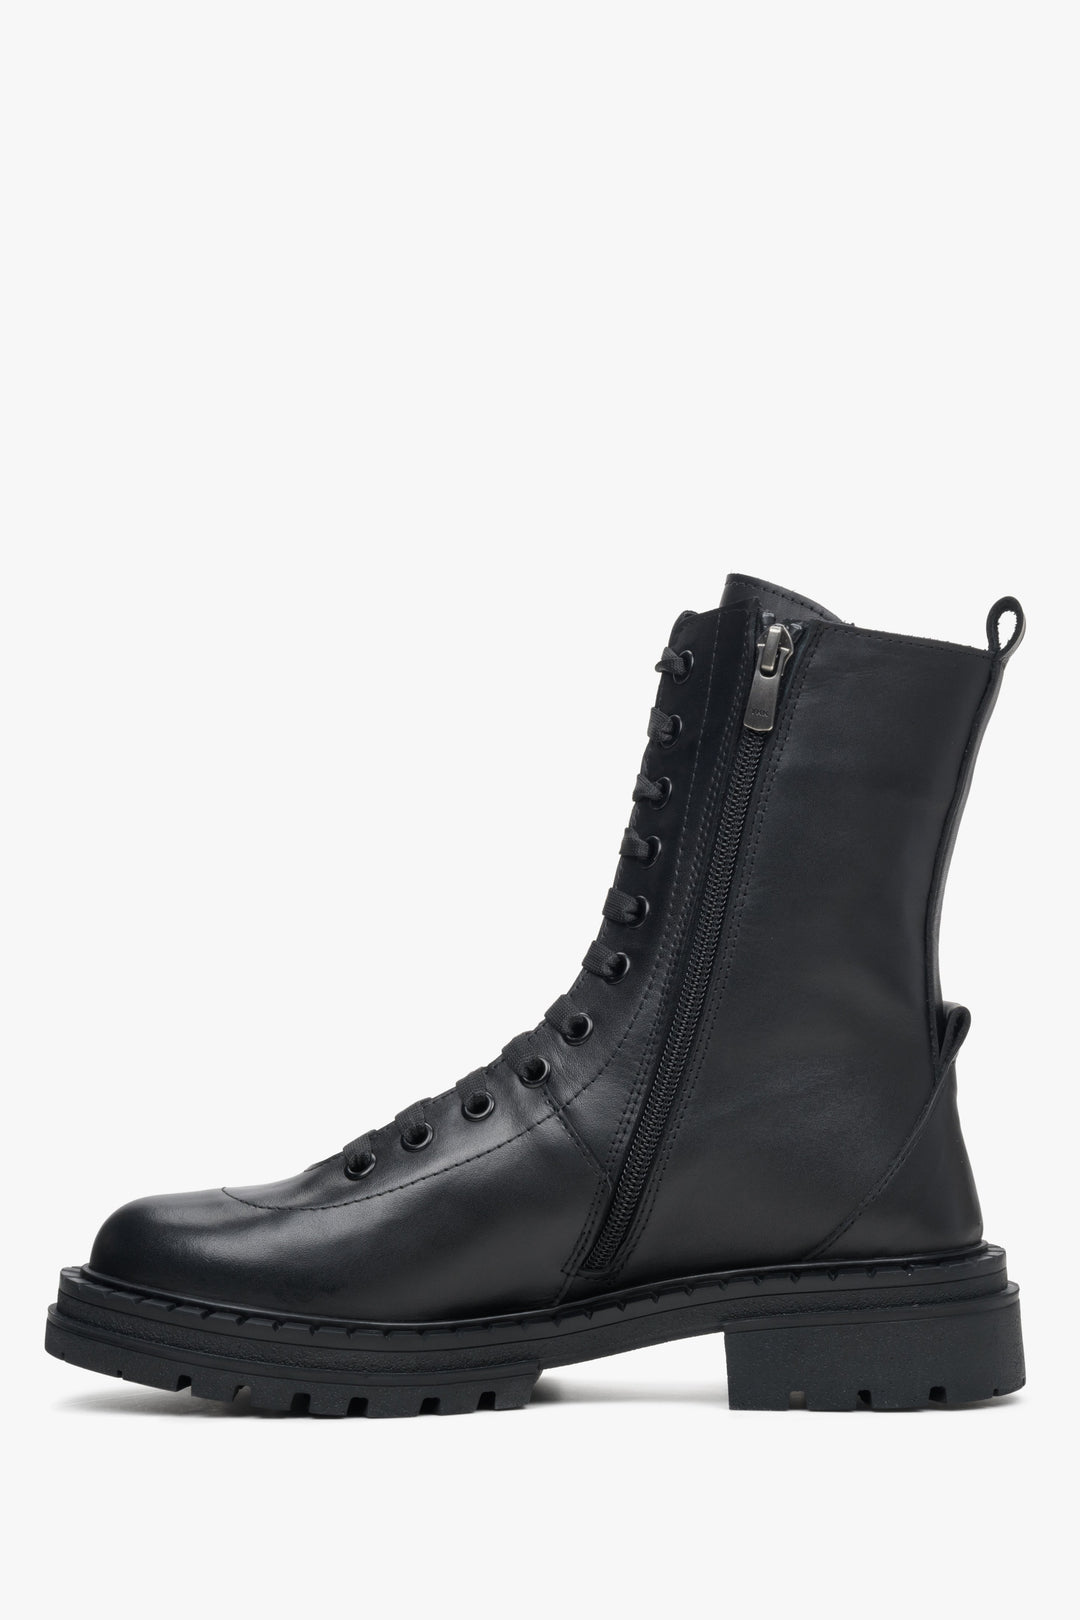 Women's black ankle boots in genuine leather by Estro - shoe profile.